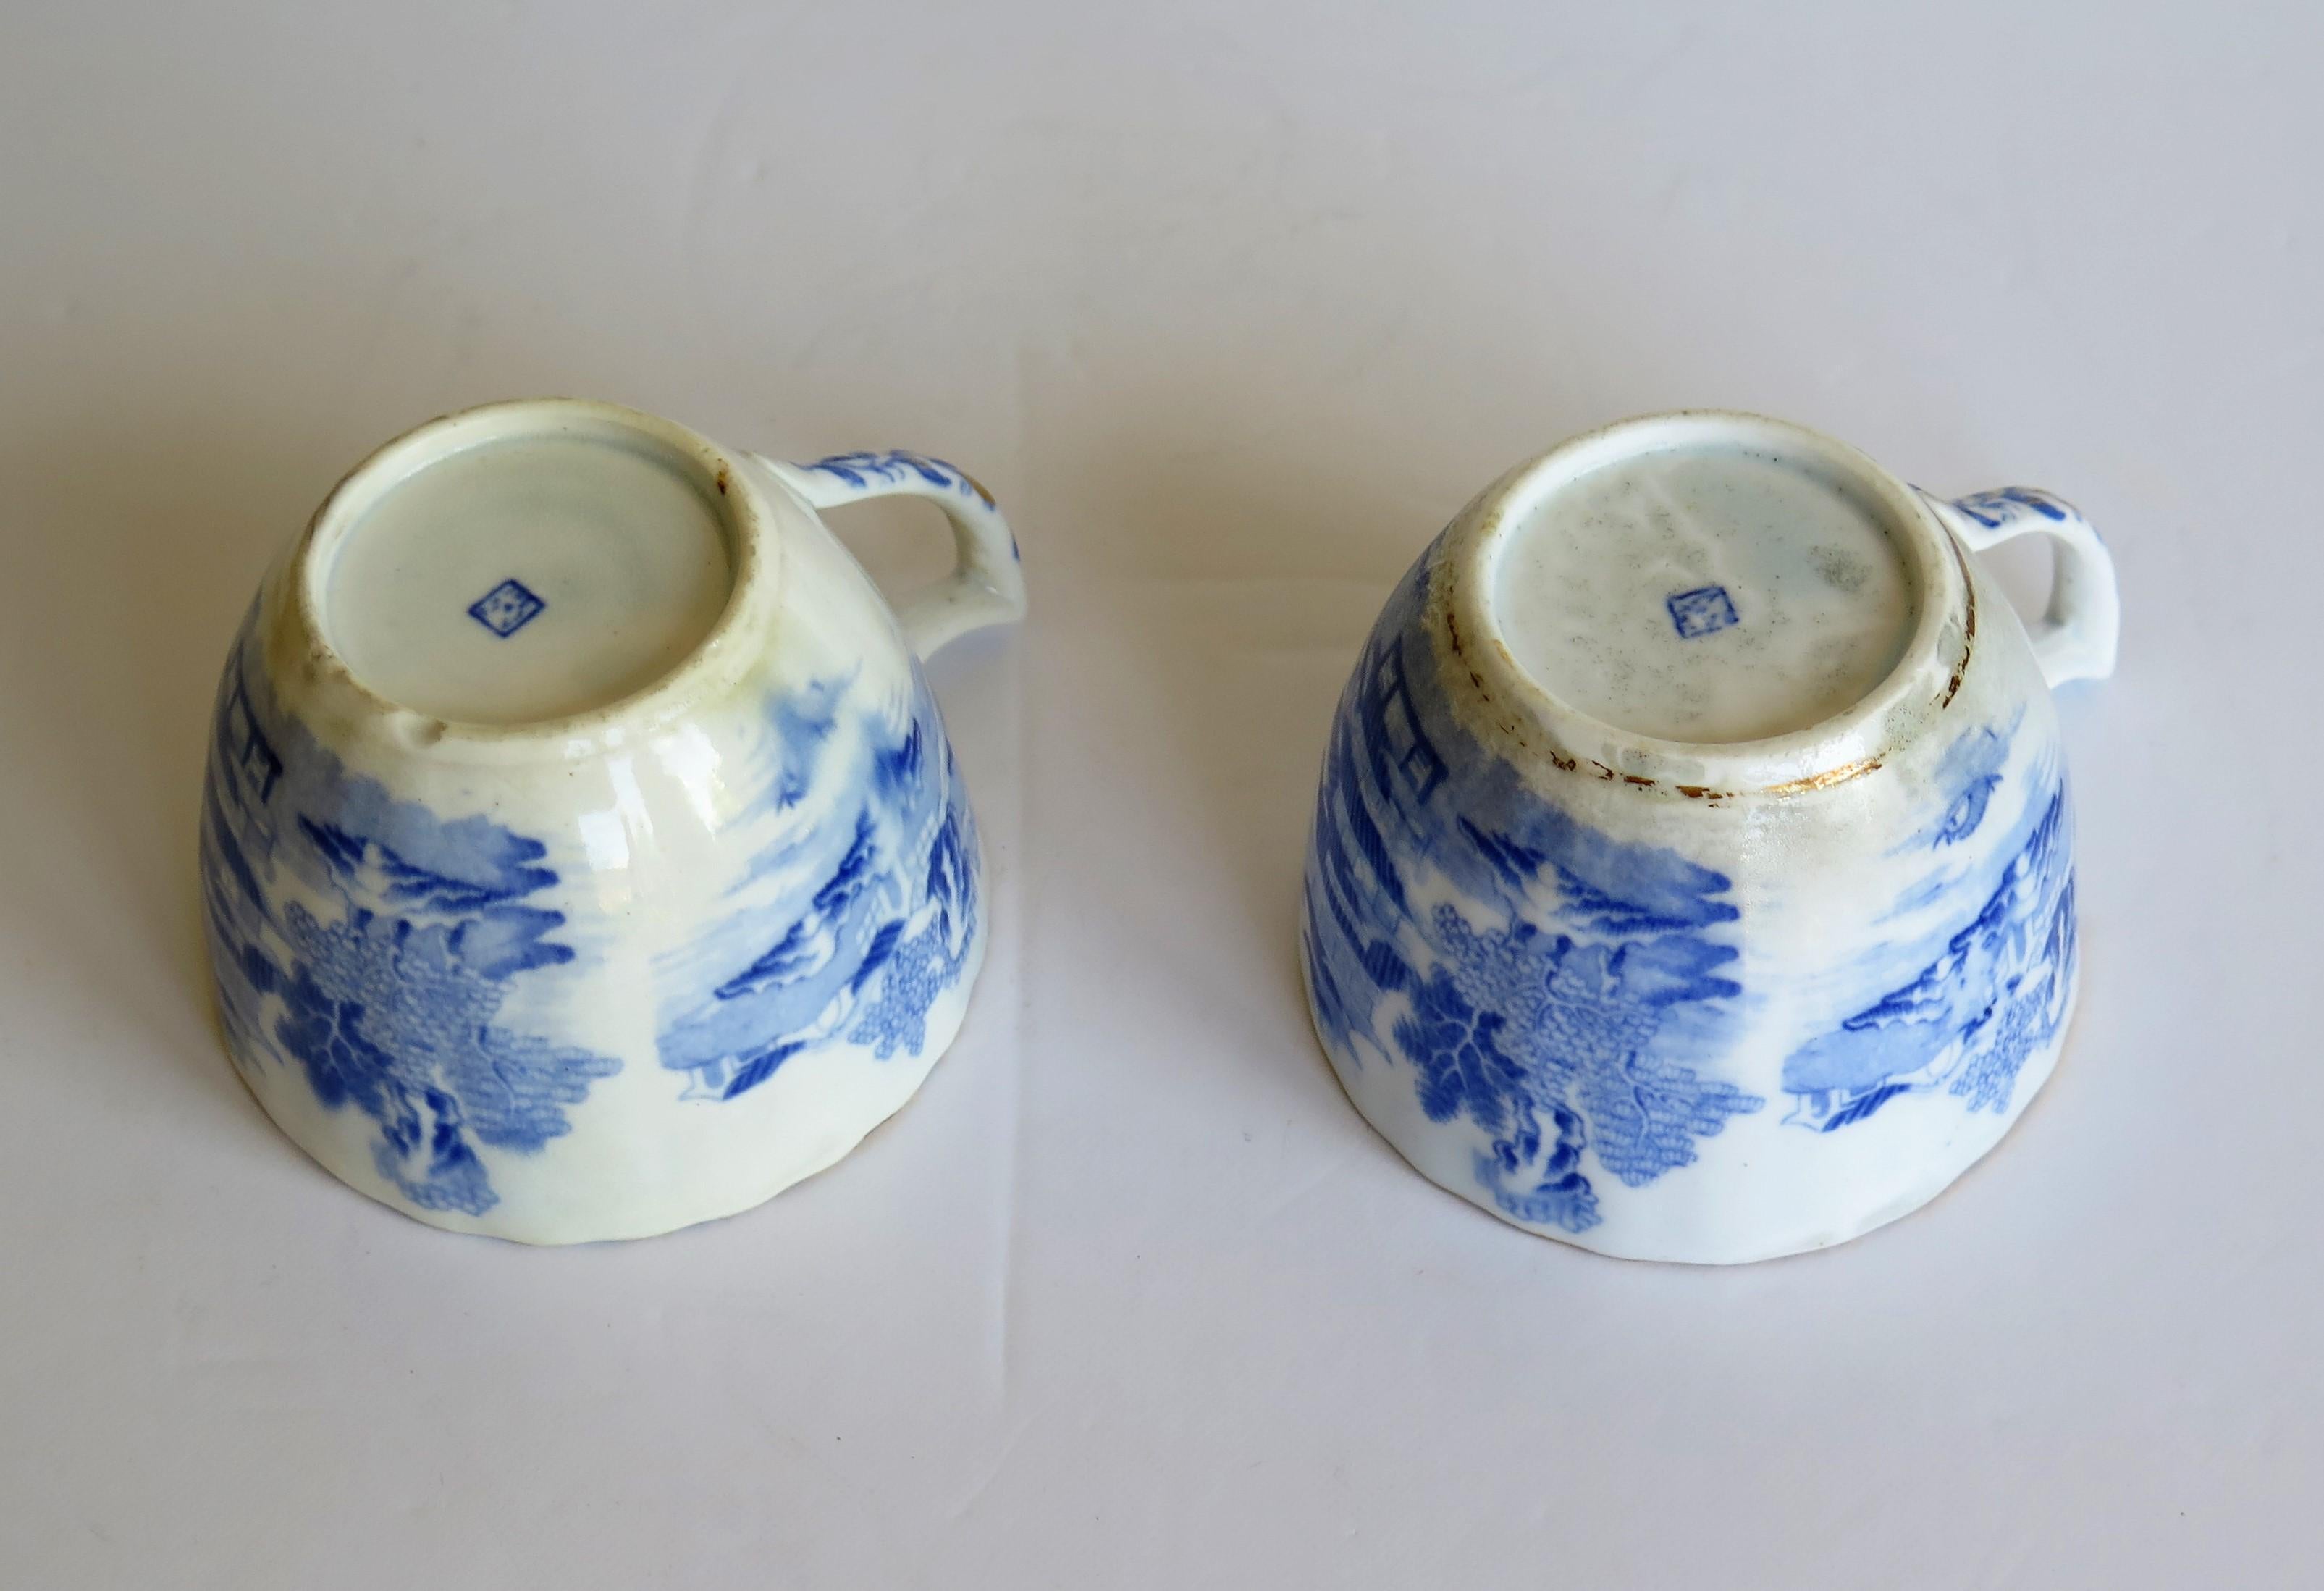 Miles Mason Porcelain Pair of Tea Cups Broseley Blue and White Pattern, Ca. 1805 For Sale 6